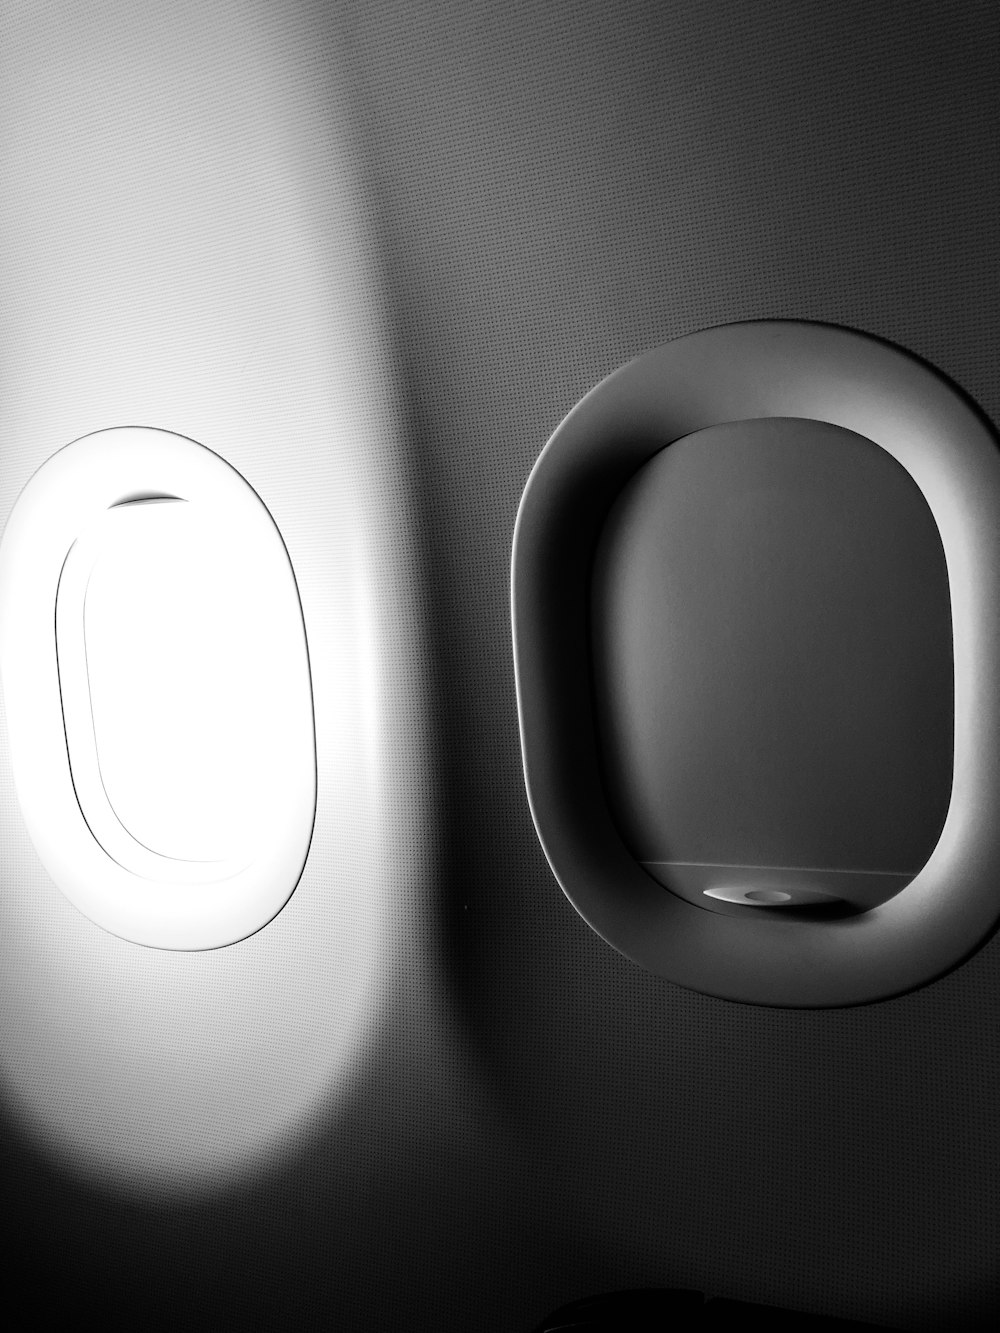 a view of the inside of an airplane window